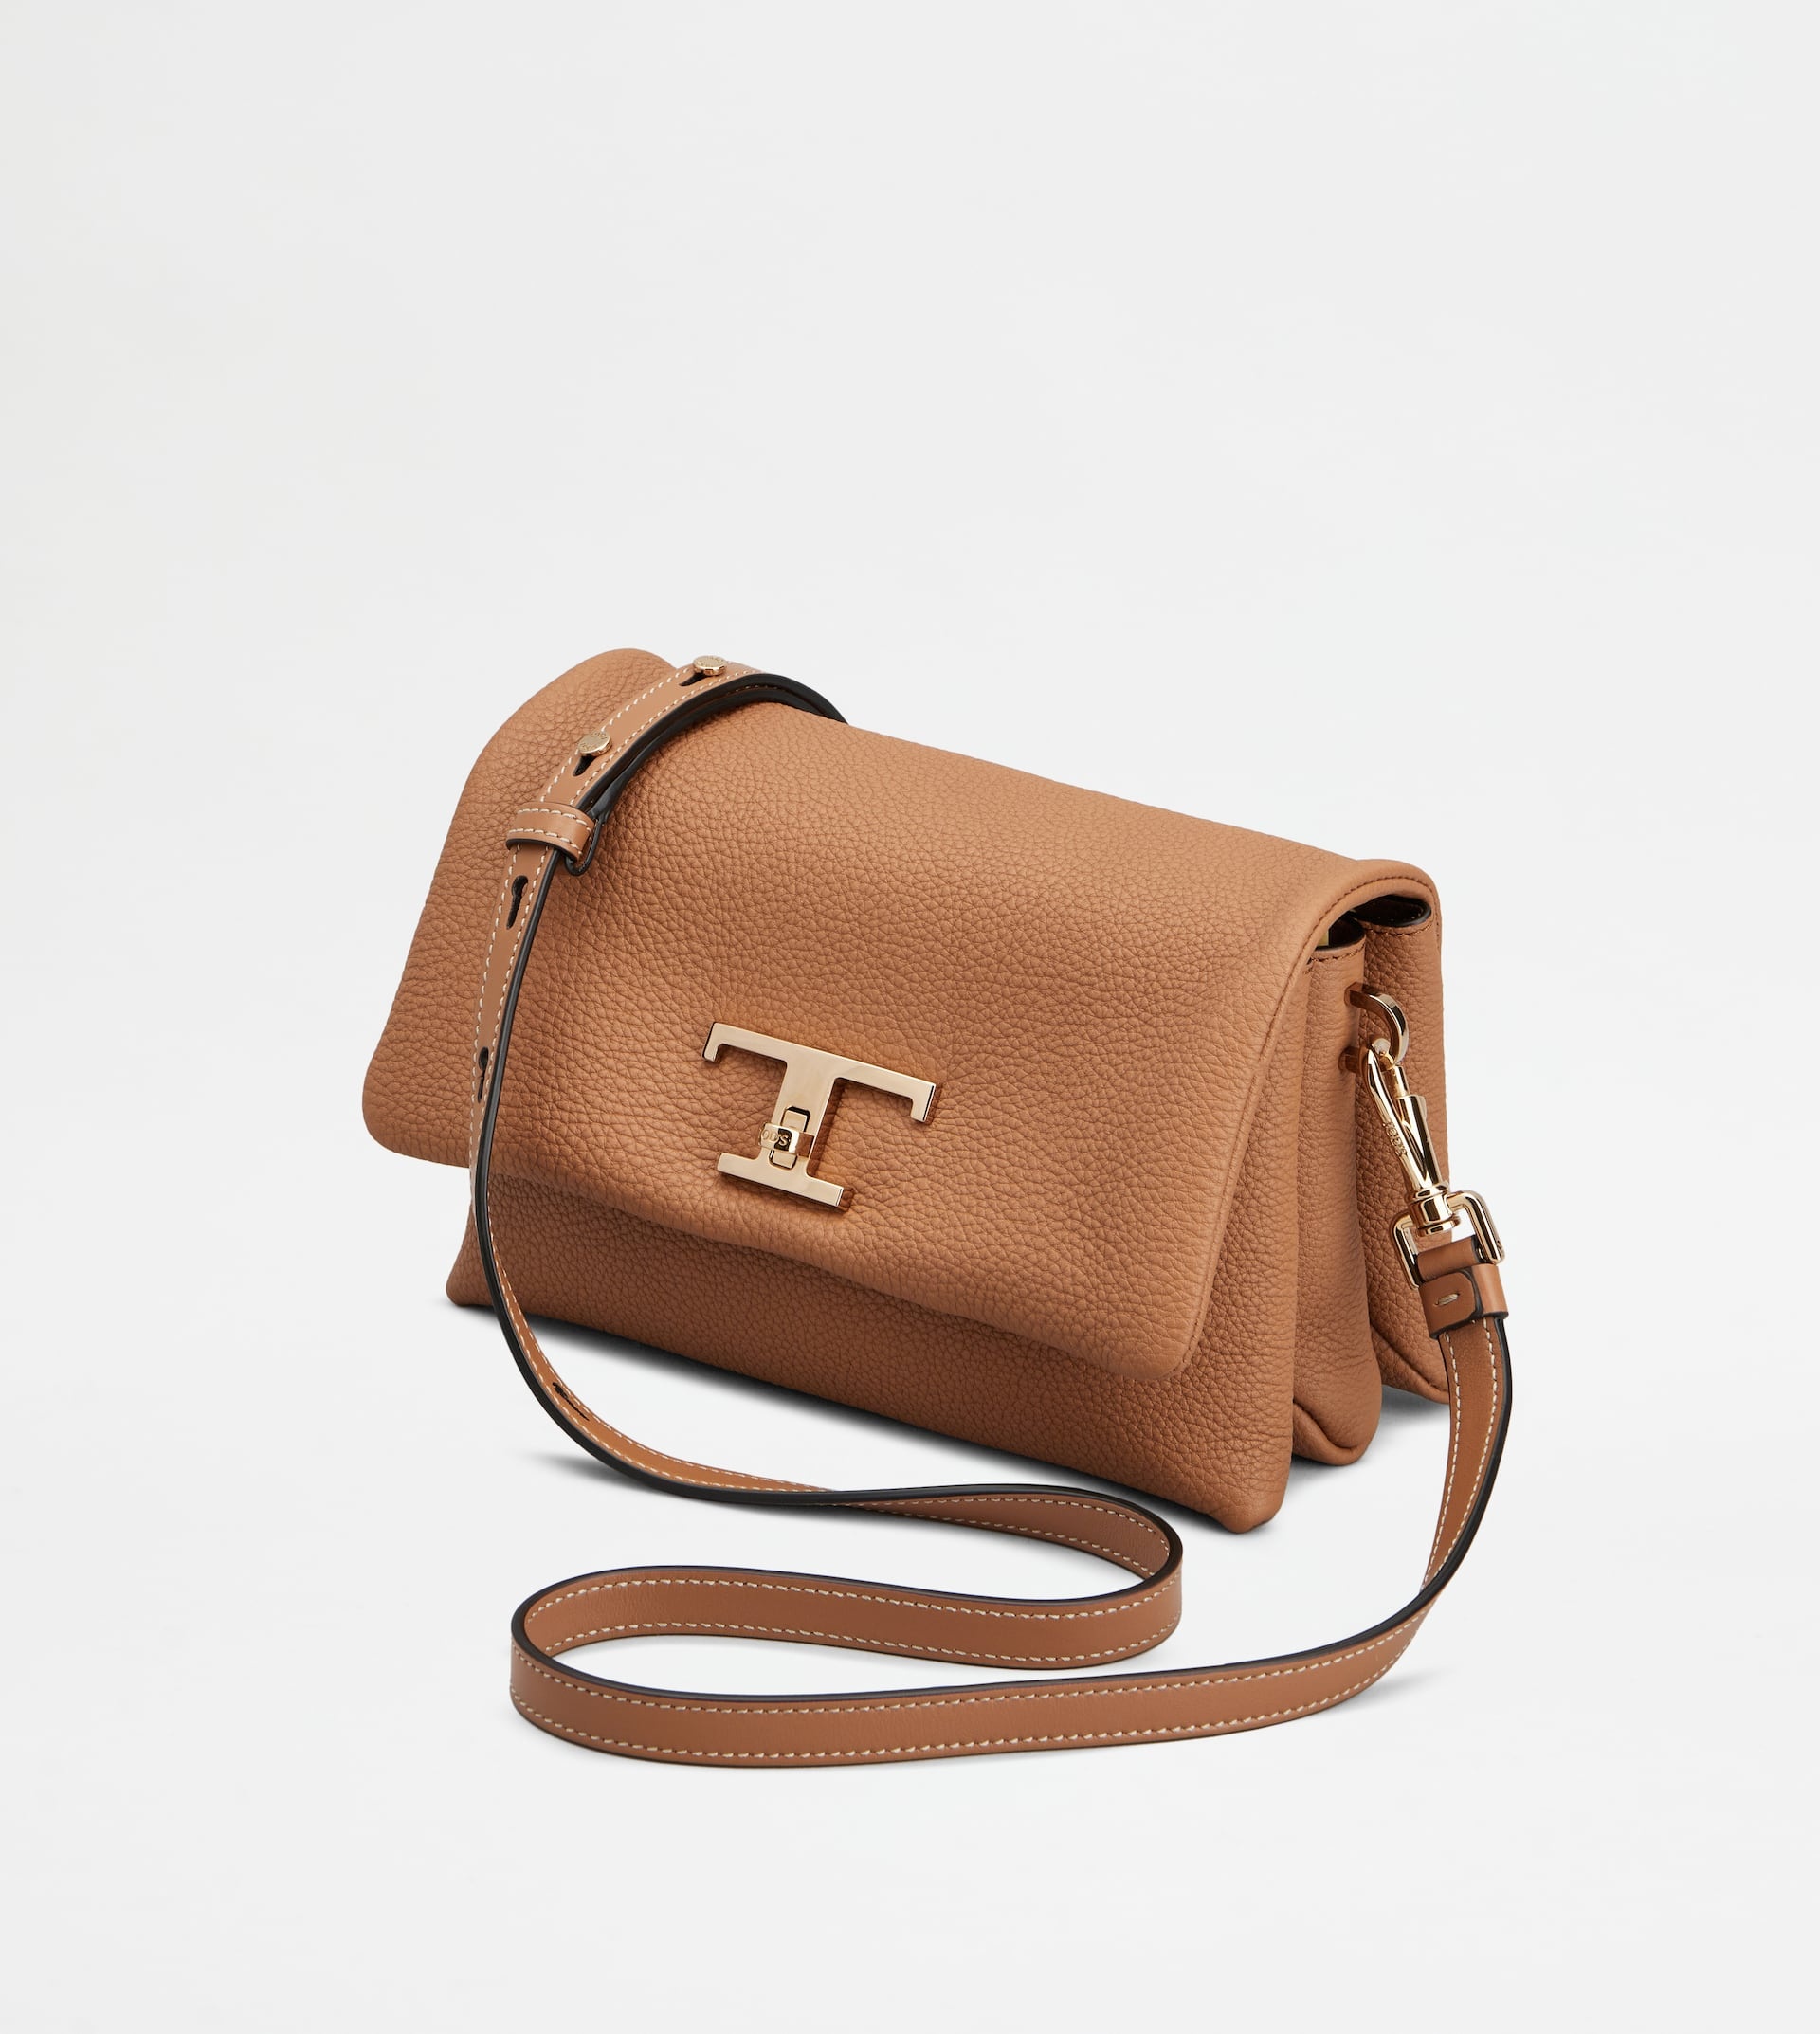 T TIMELESS FLAP BAG IN LEATHER MINI - BROWN - 6